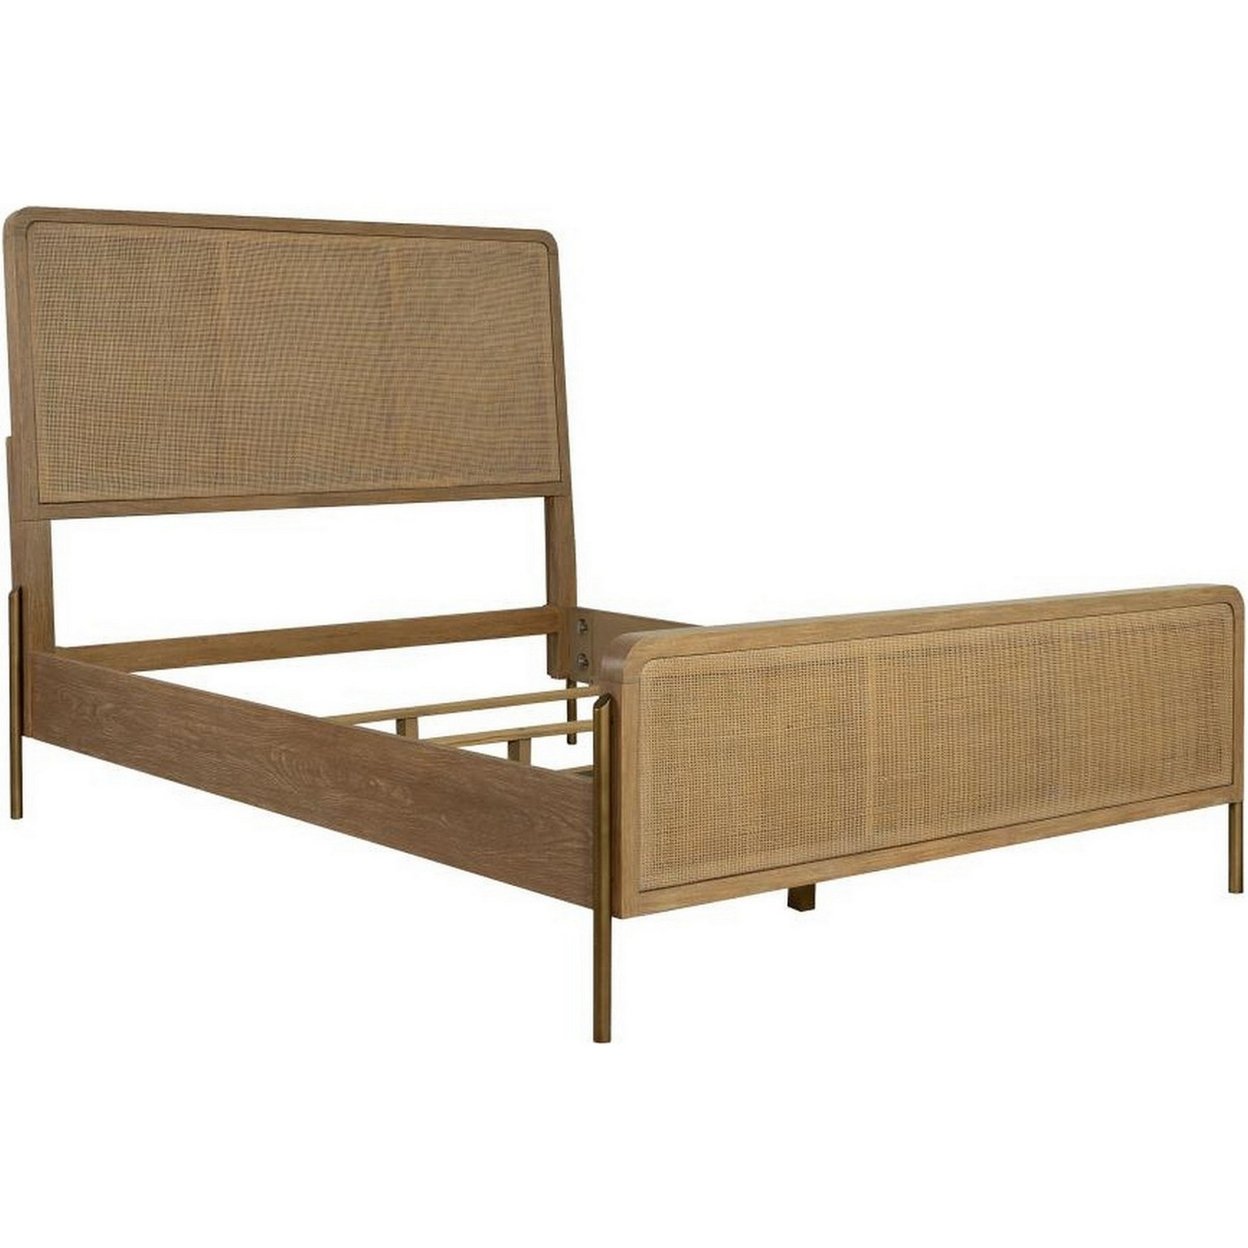 Sea Wood Queen Size Bed With Woven Cane Design, Open Panel, 4 Slats, Brown- Saltoro Sherpi